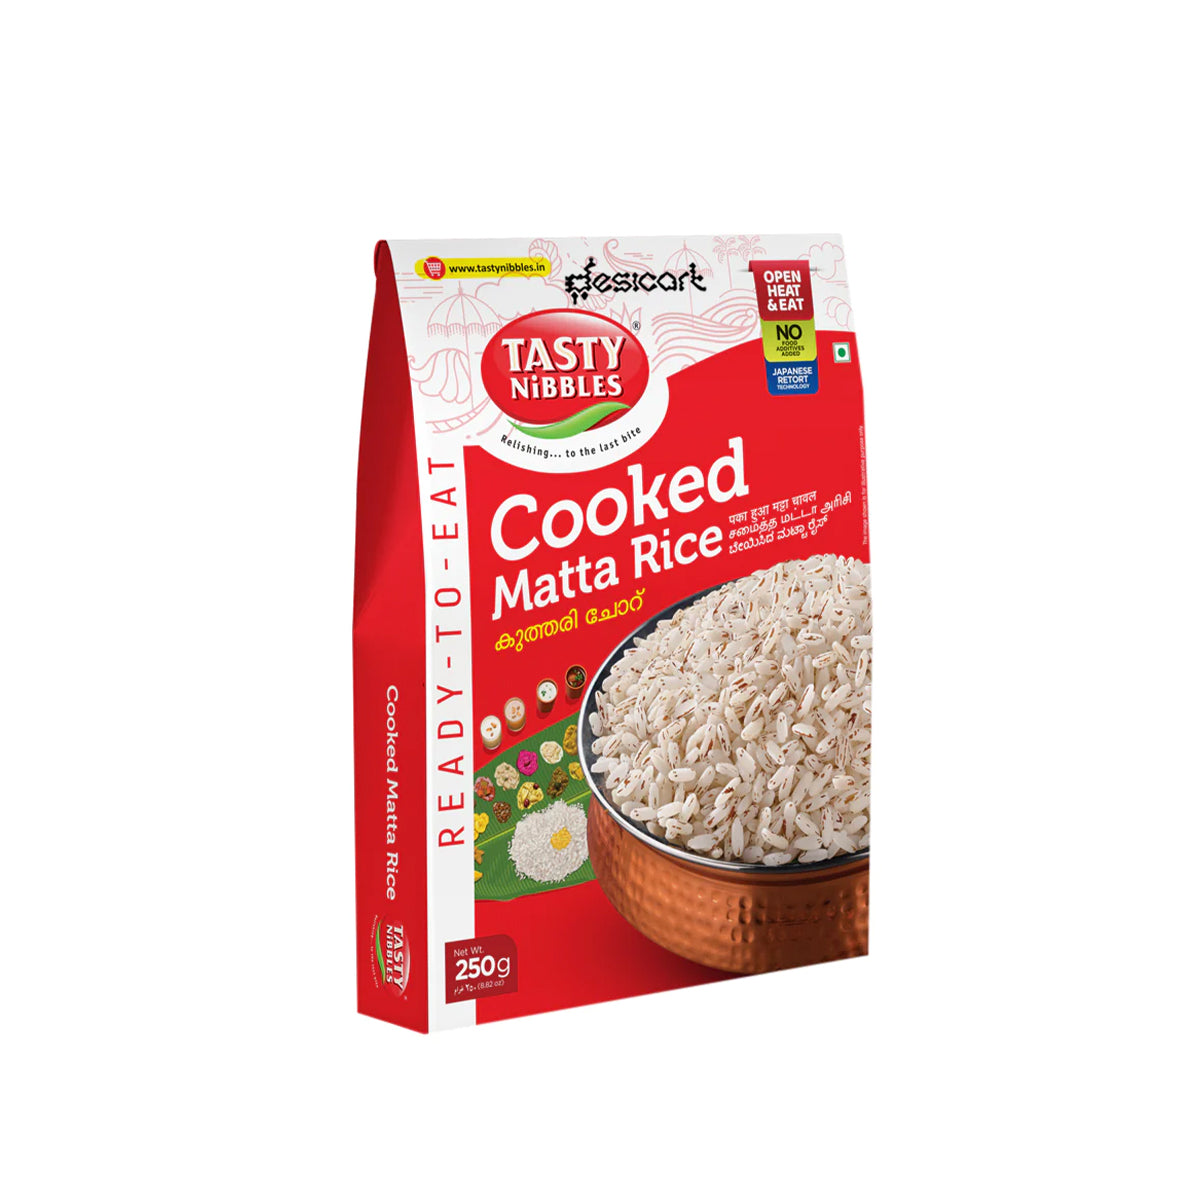 TASTY NIBBLES COOKED MATTA RICE 250G